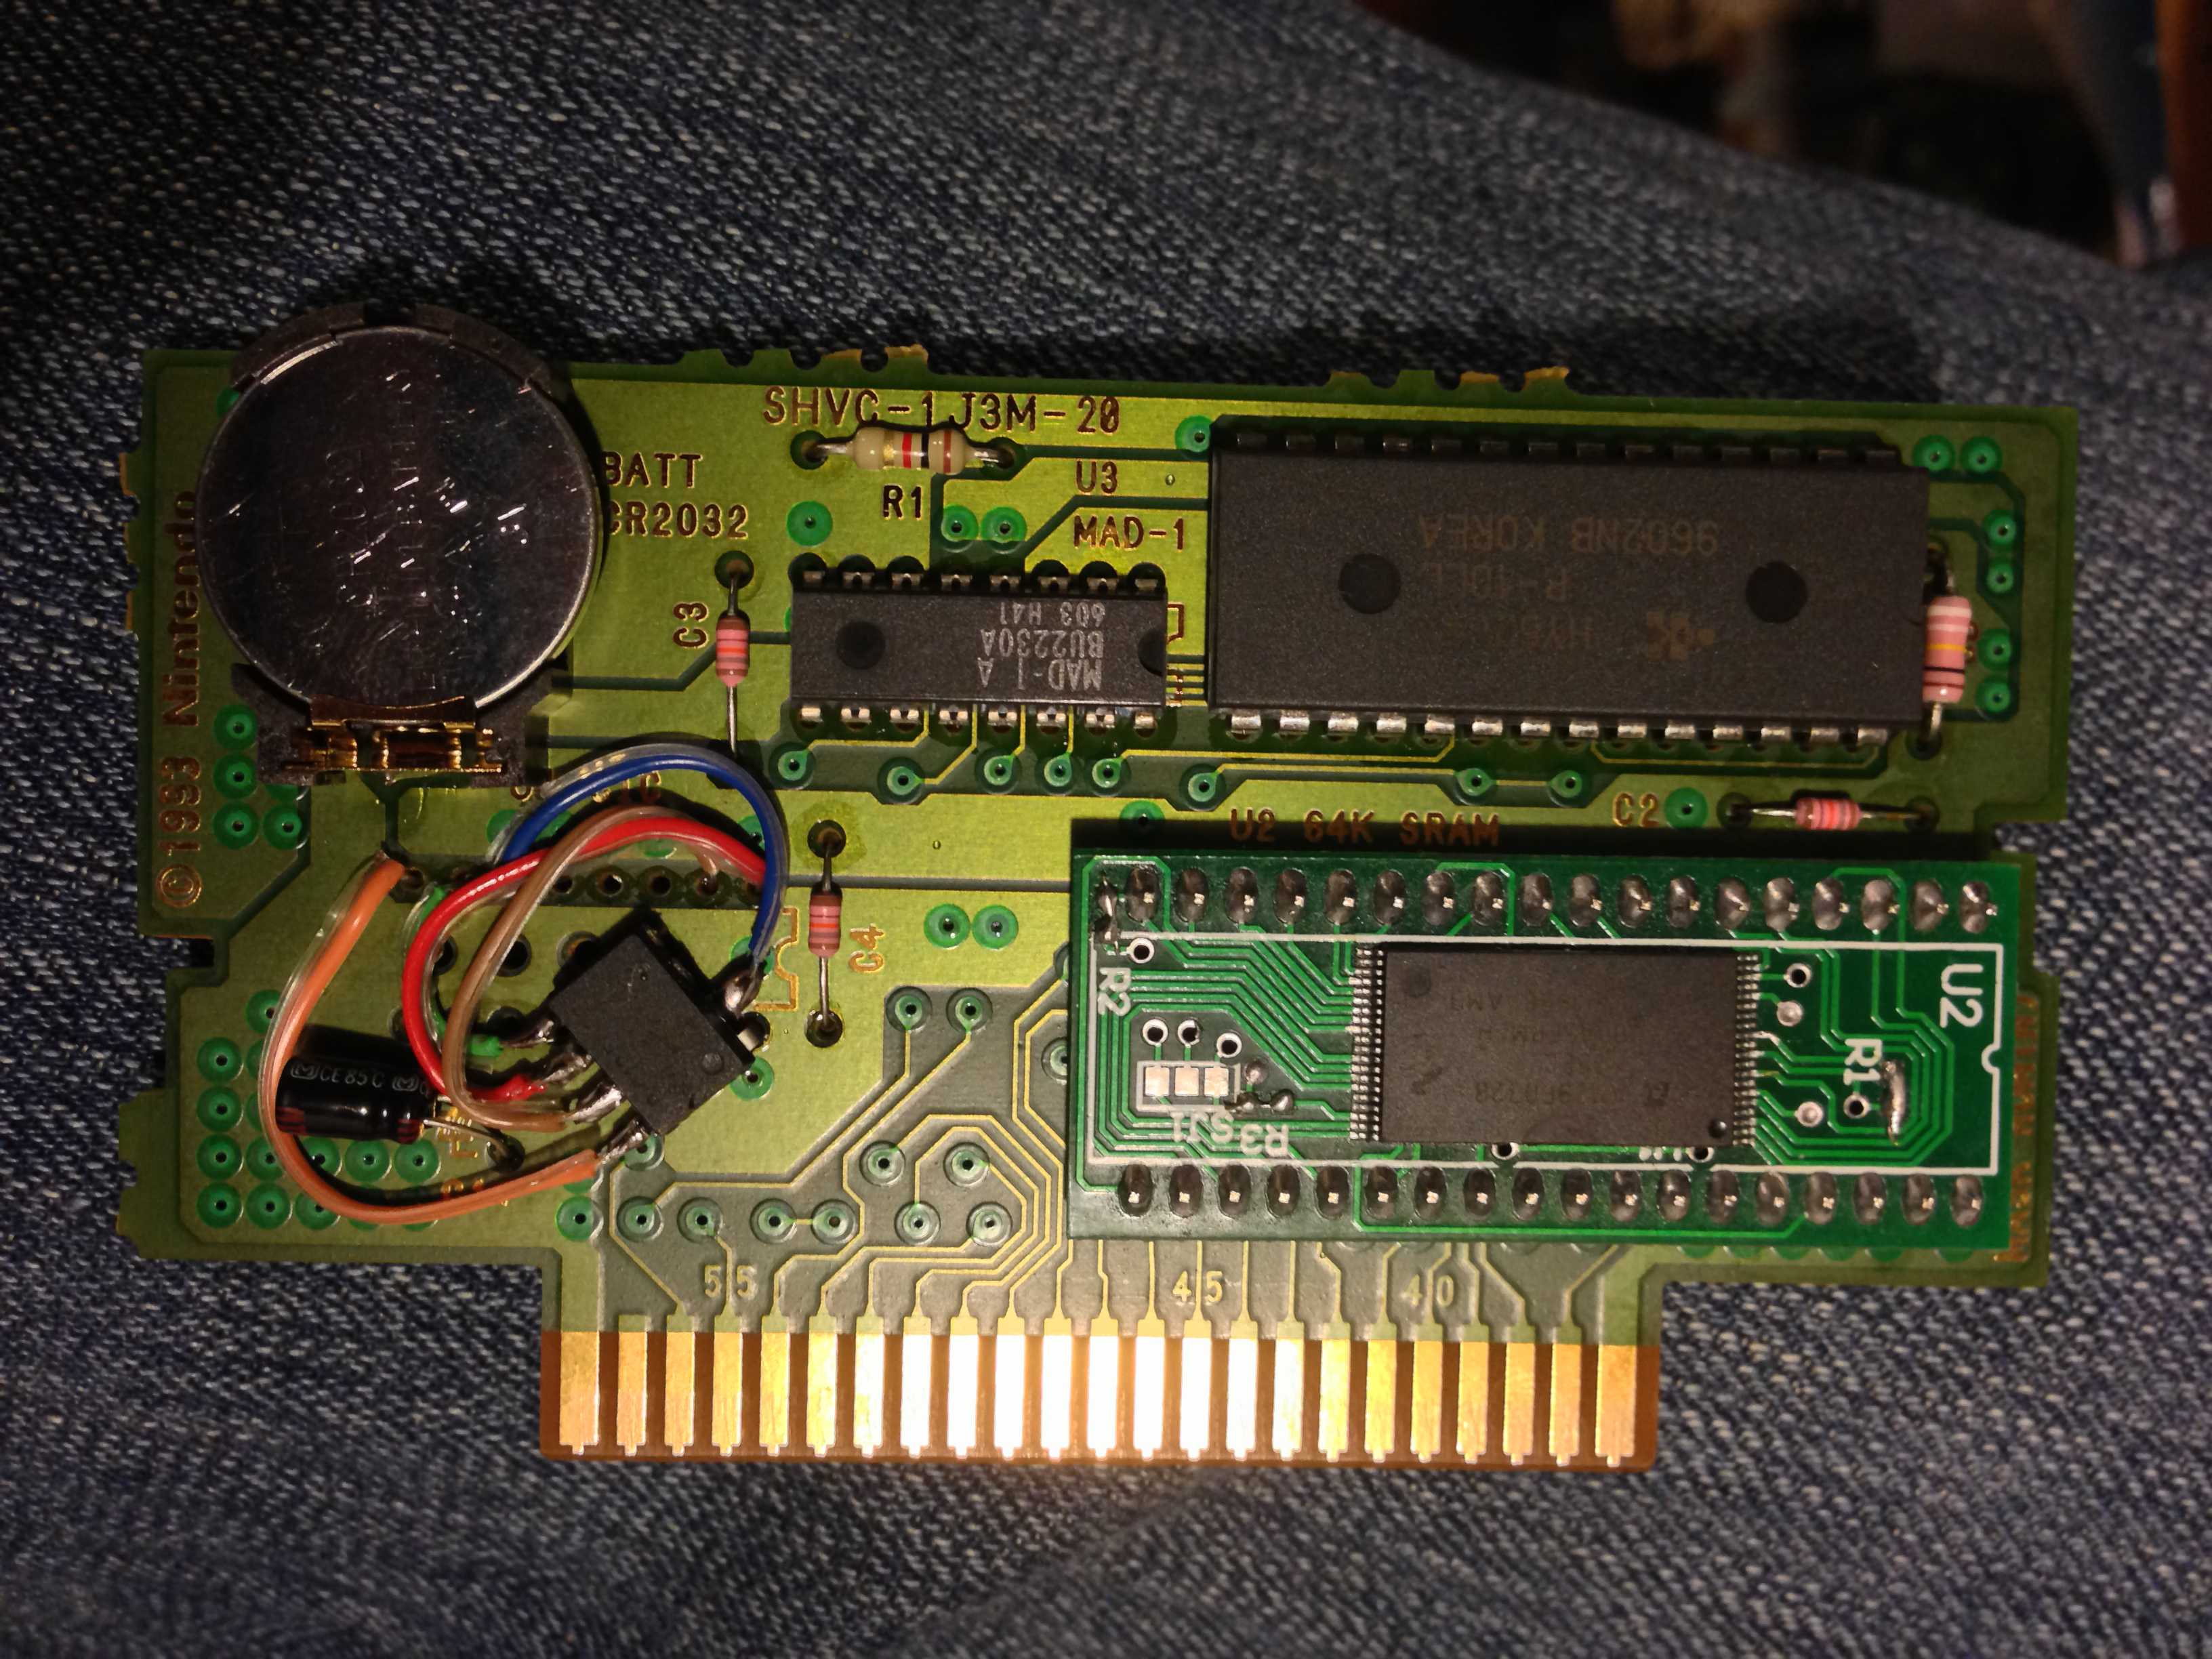 SNES Cart region-free modification (Replacing CIC lockout-chip with SuperCIC)